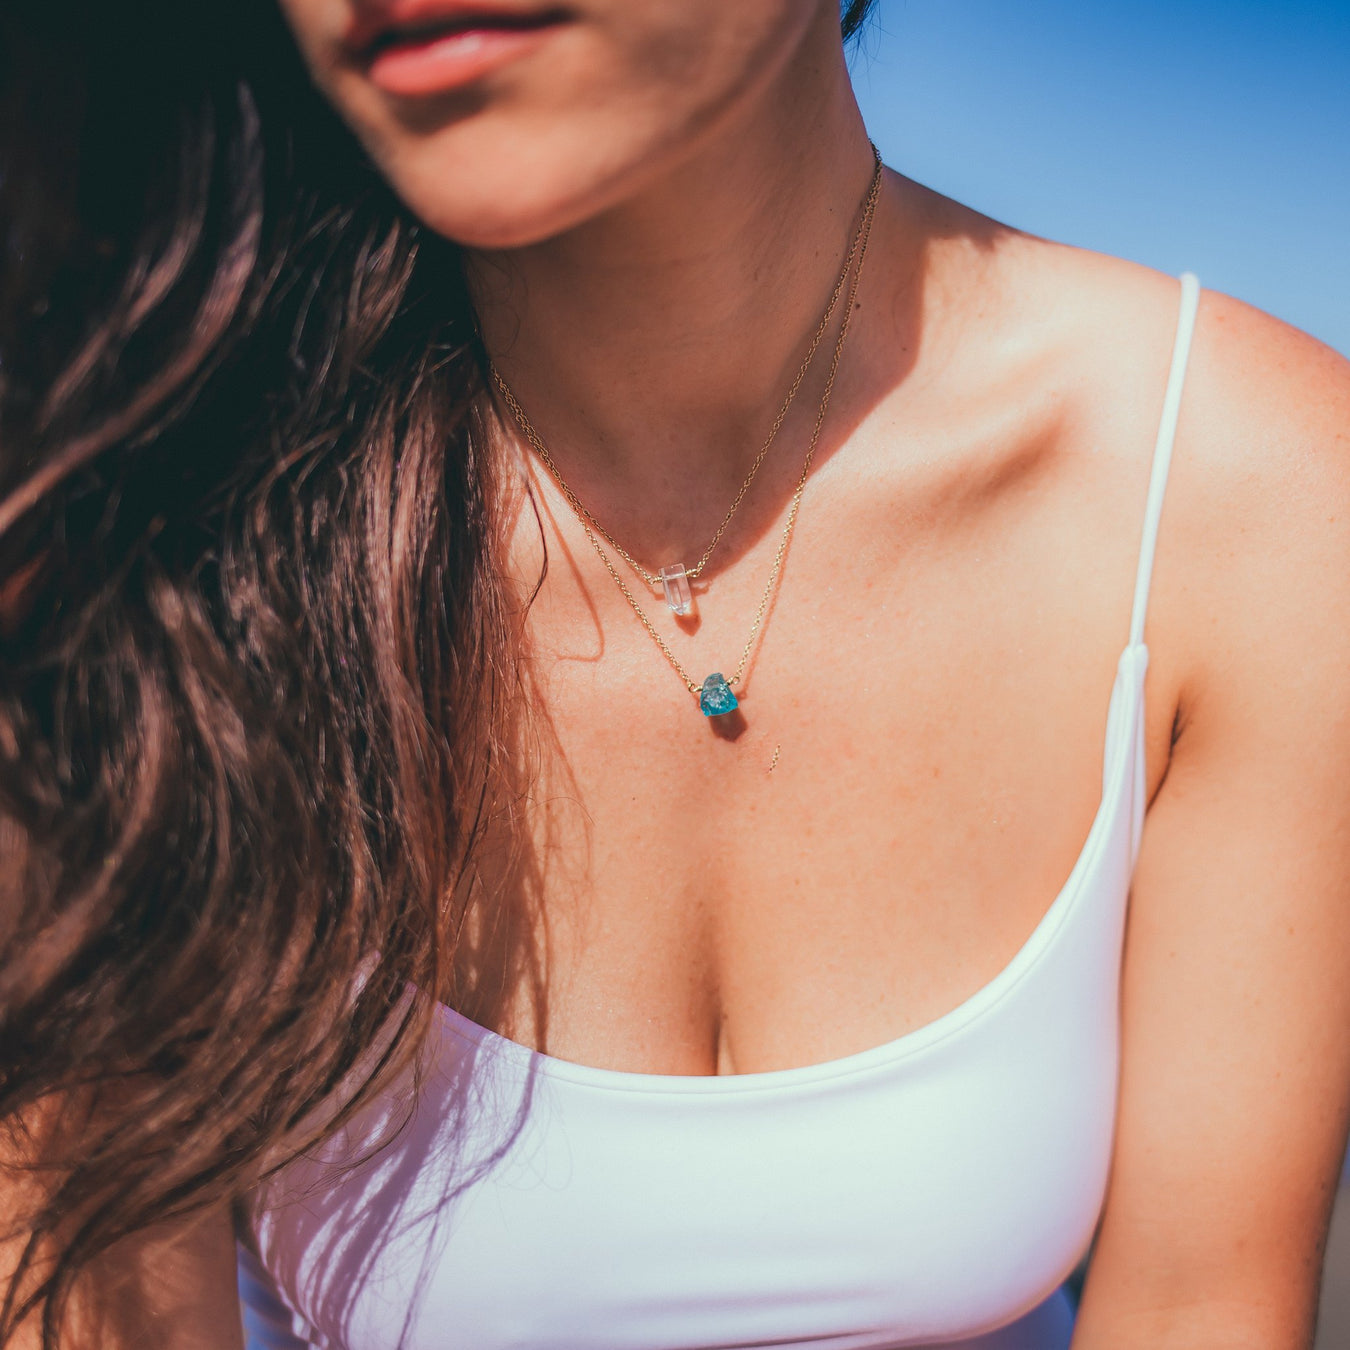 Model wearing Tiny Crystal Necklaces Clear Quartz and Apatite - Blooming Lotus Jewelry